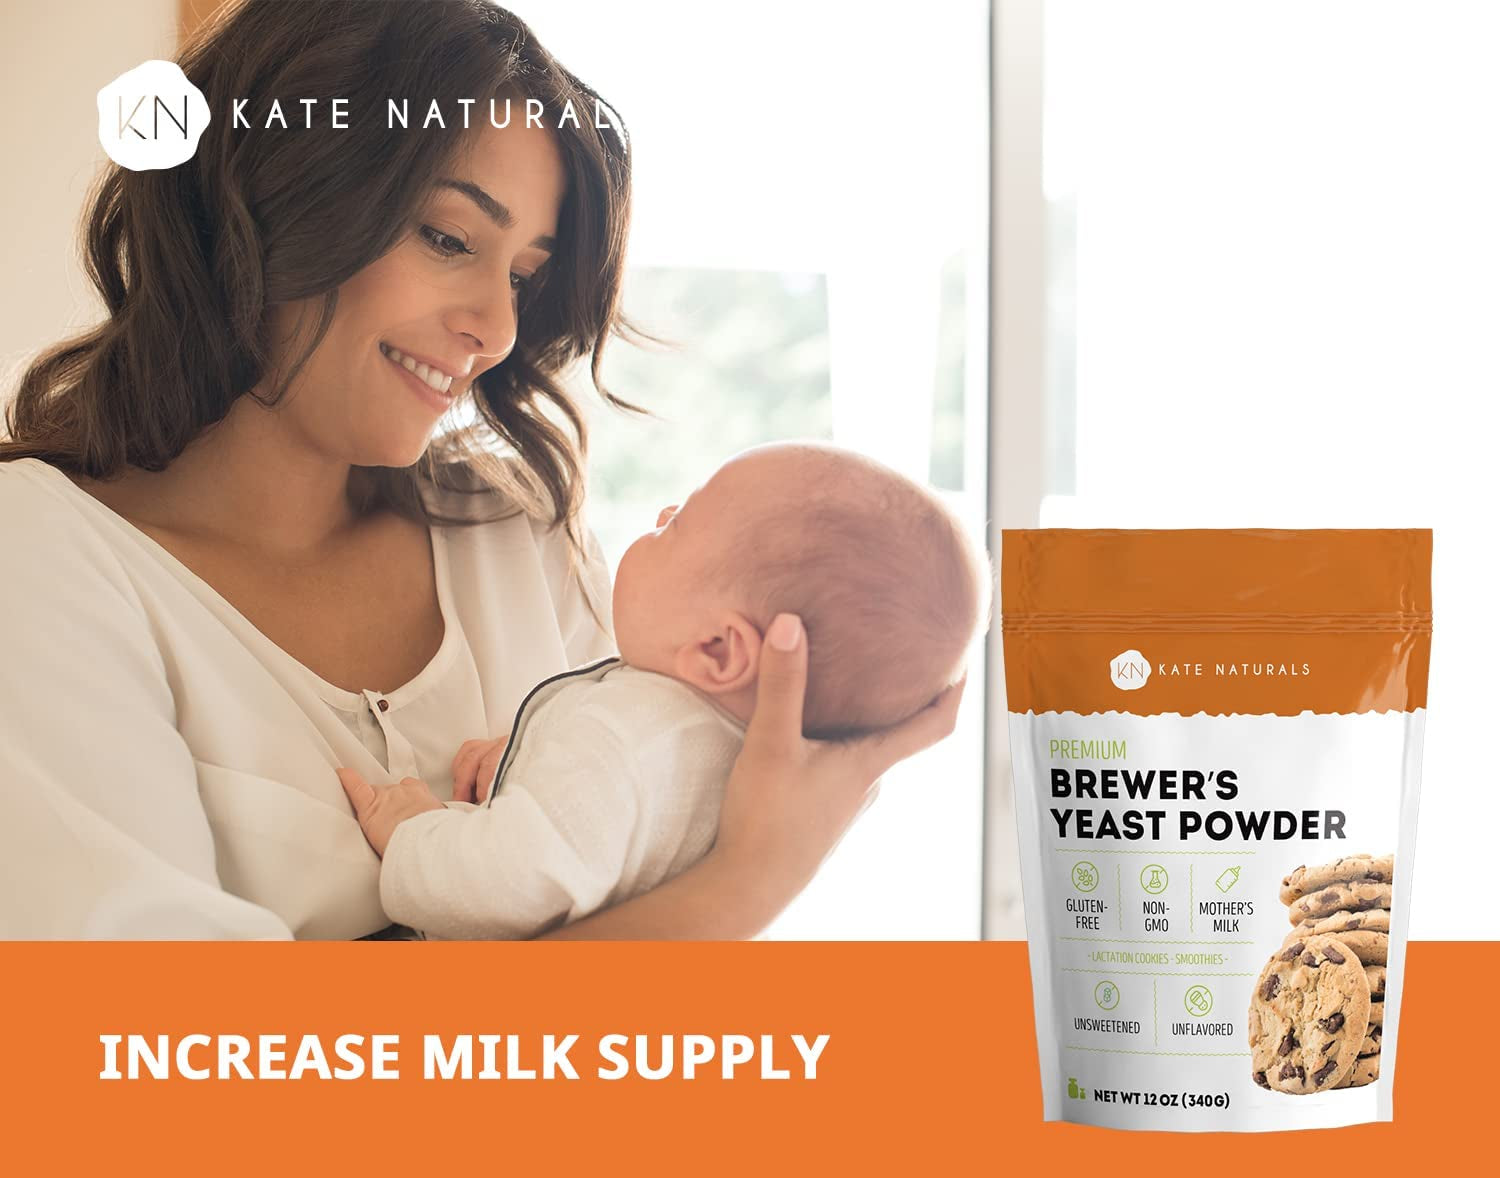 Brewers Yeast Powder for Lactation to Boost Mother'S Milk by Kate Naturals for Cookies. Gluten Free & Non-Gmo Lactation Supplement. Edible for Dogs & Ducks (12Oz)